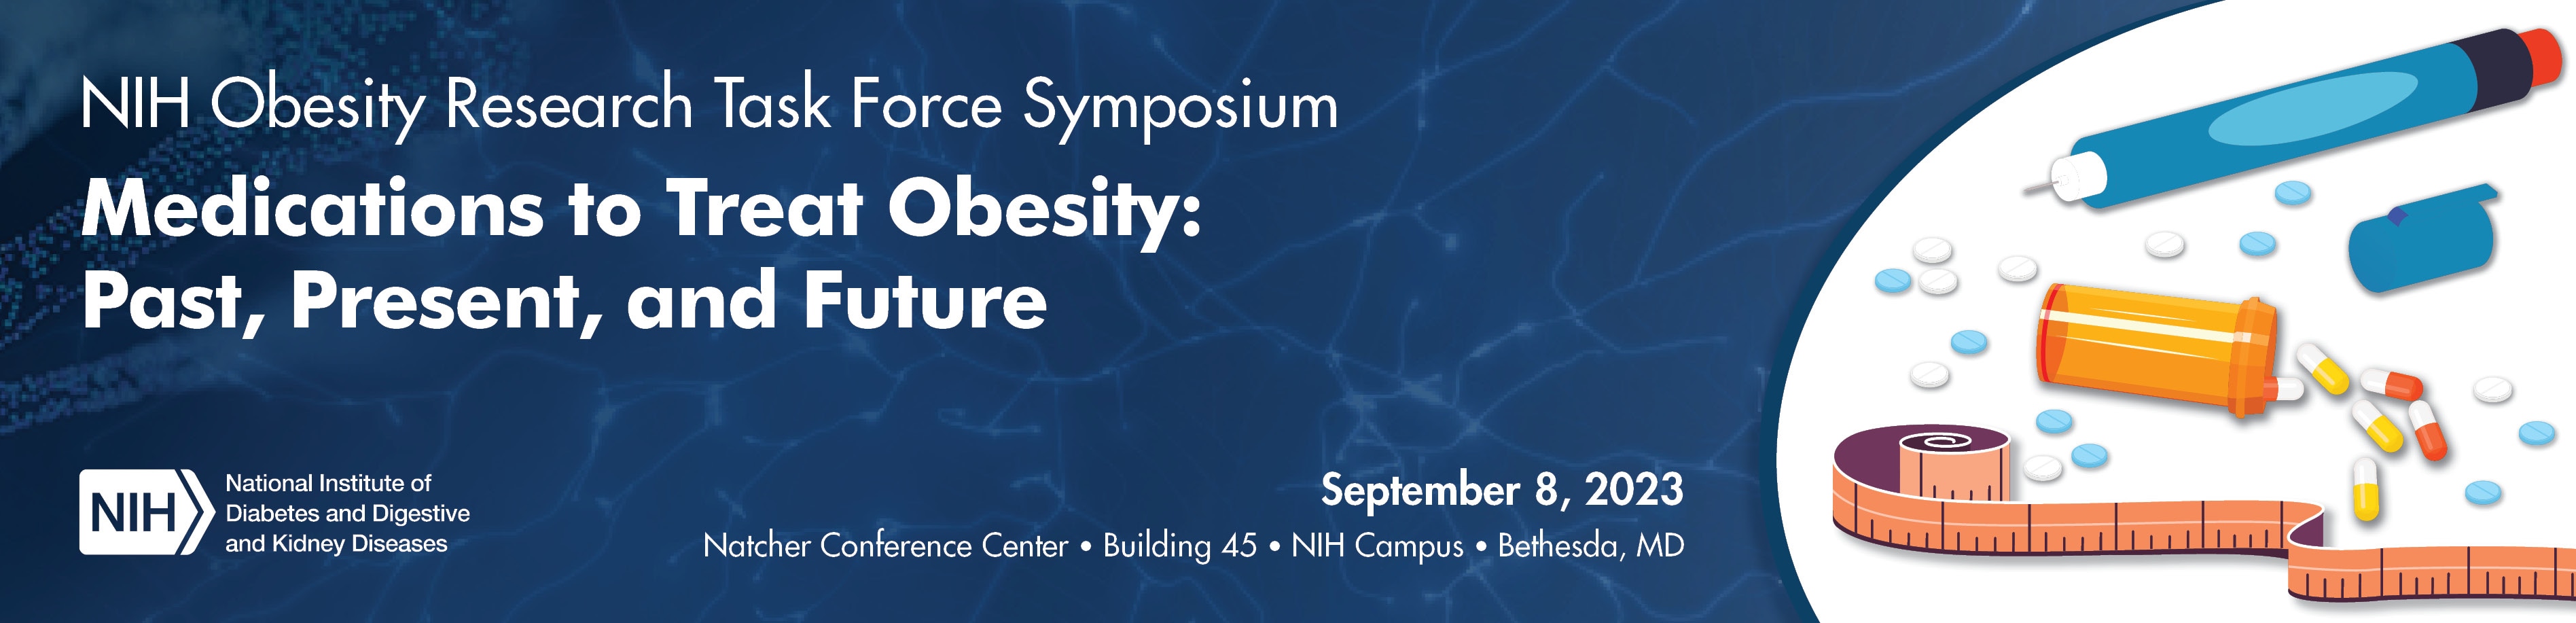 Web banner for the 2023 NIH Obesity Research Task Force Symposium